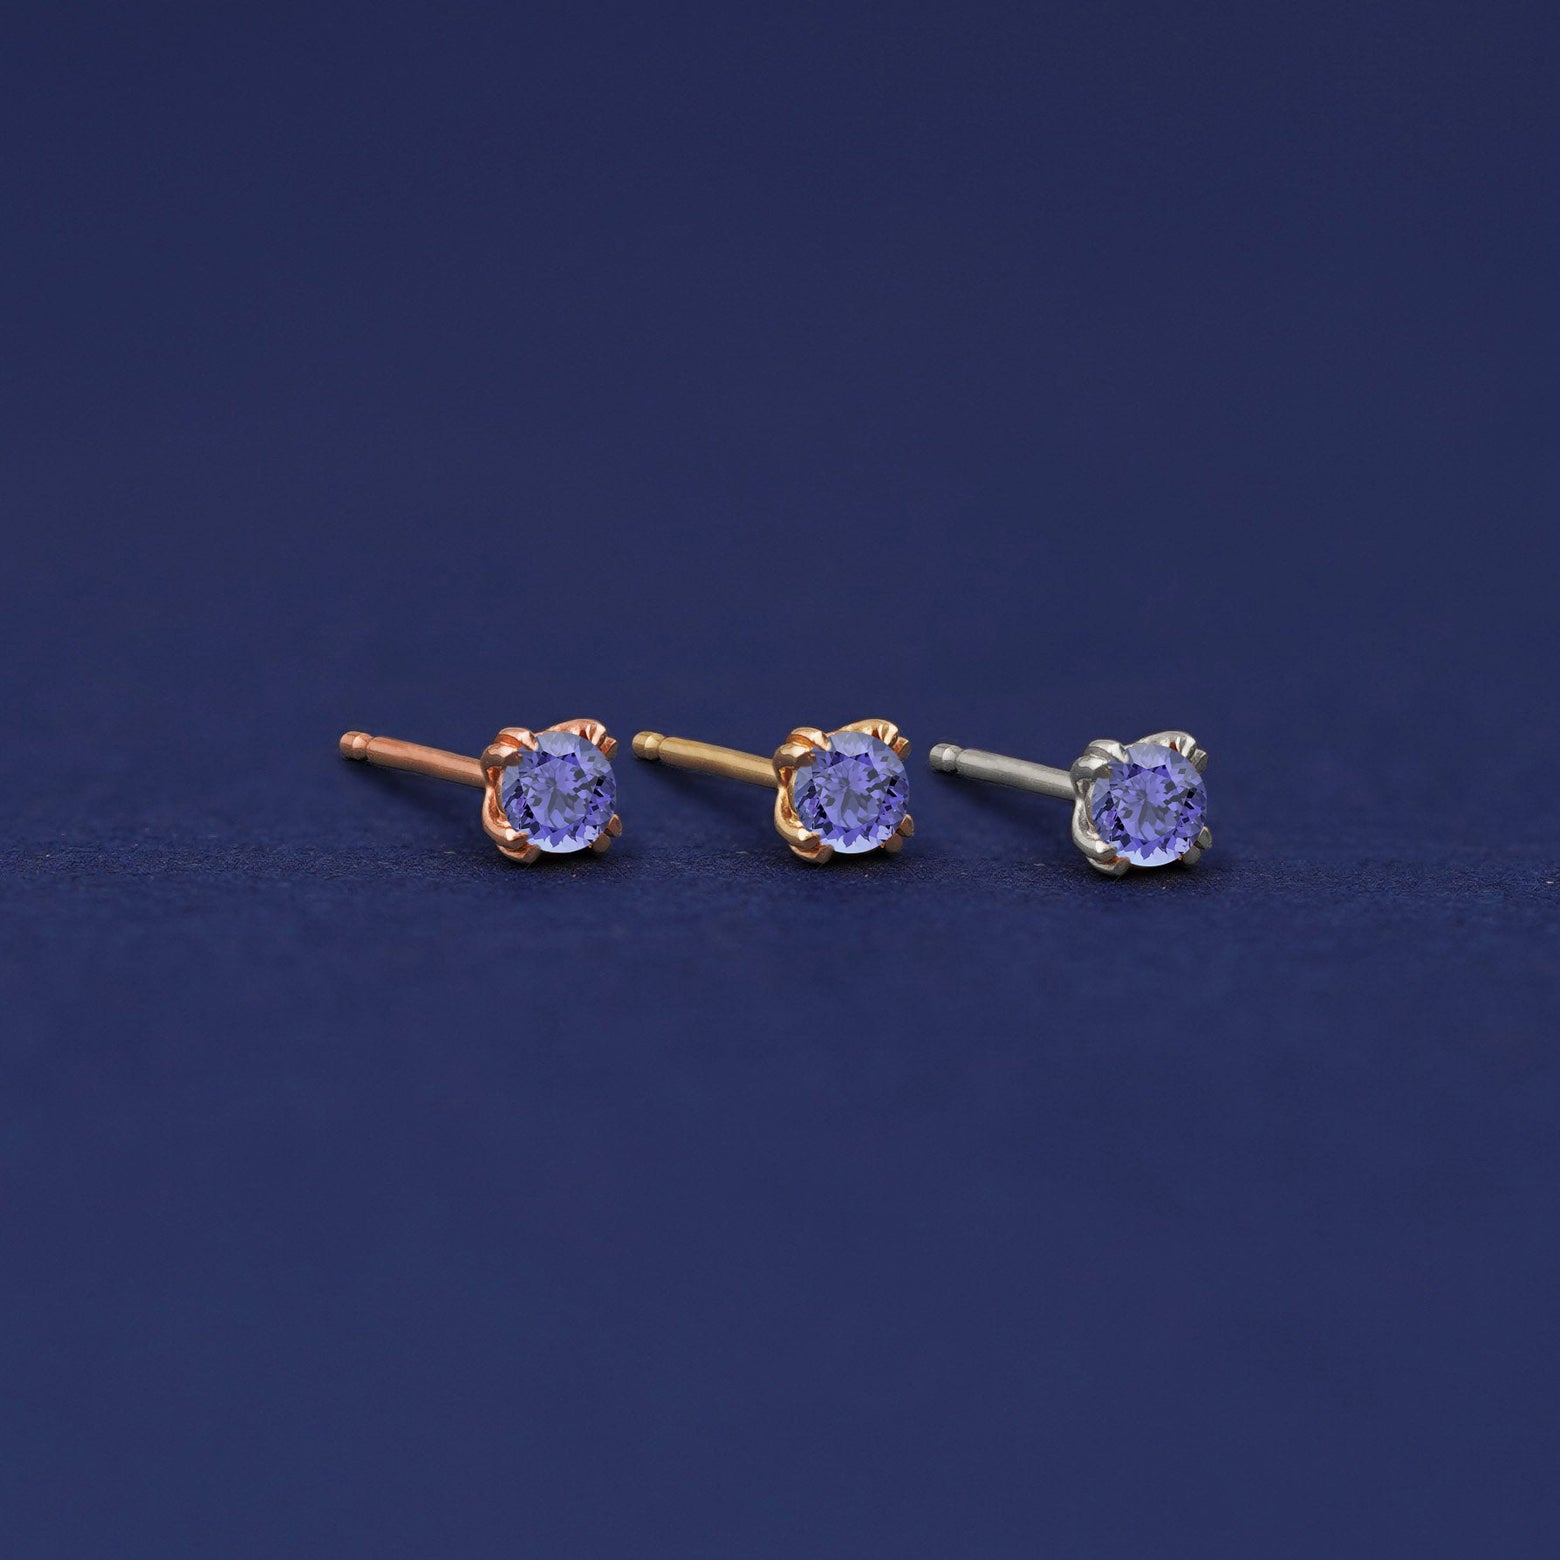 Three versions of the Tanzanite Earring shown in options of rose, yellow, and white gold